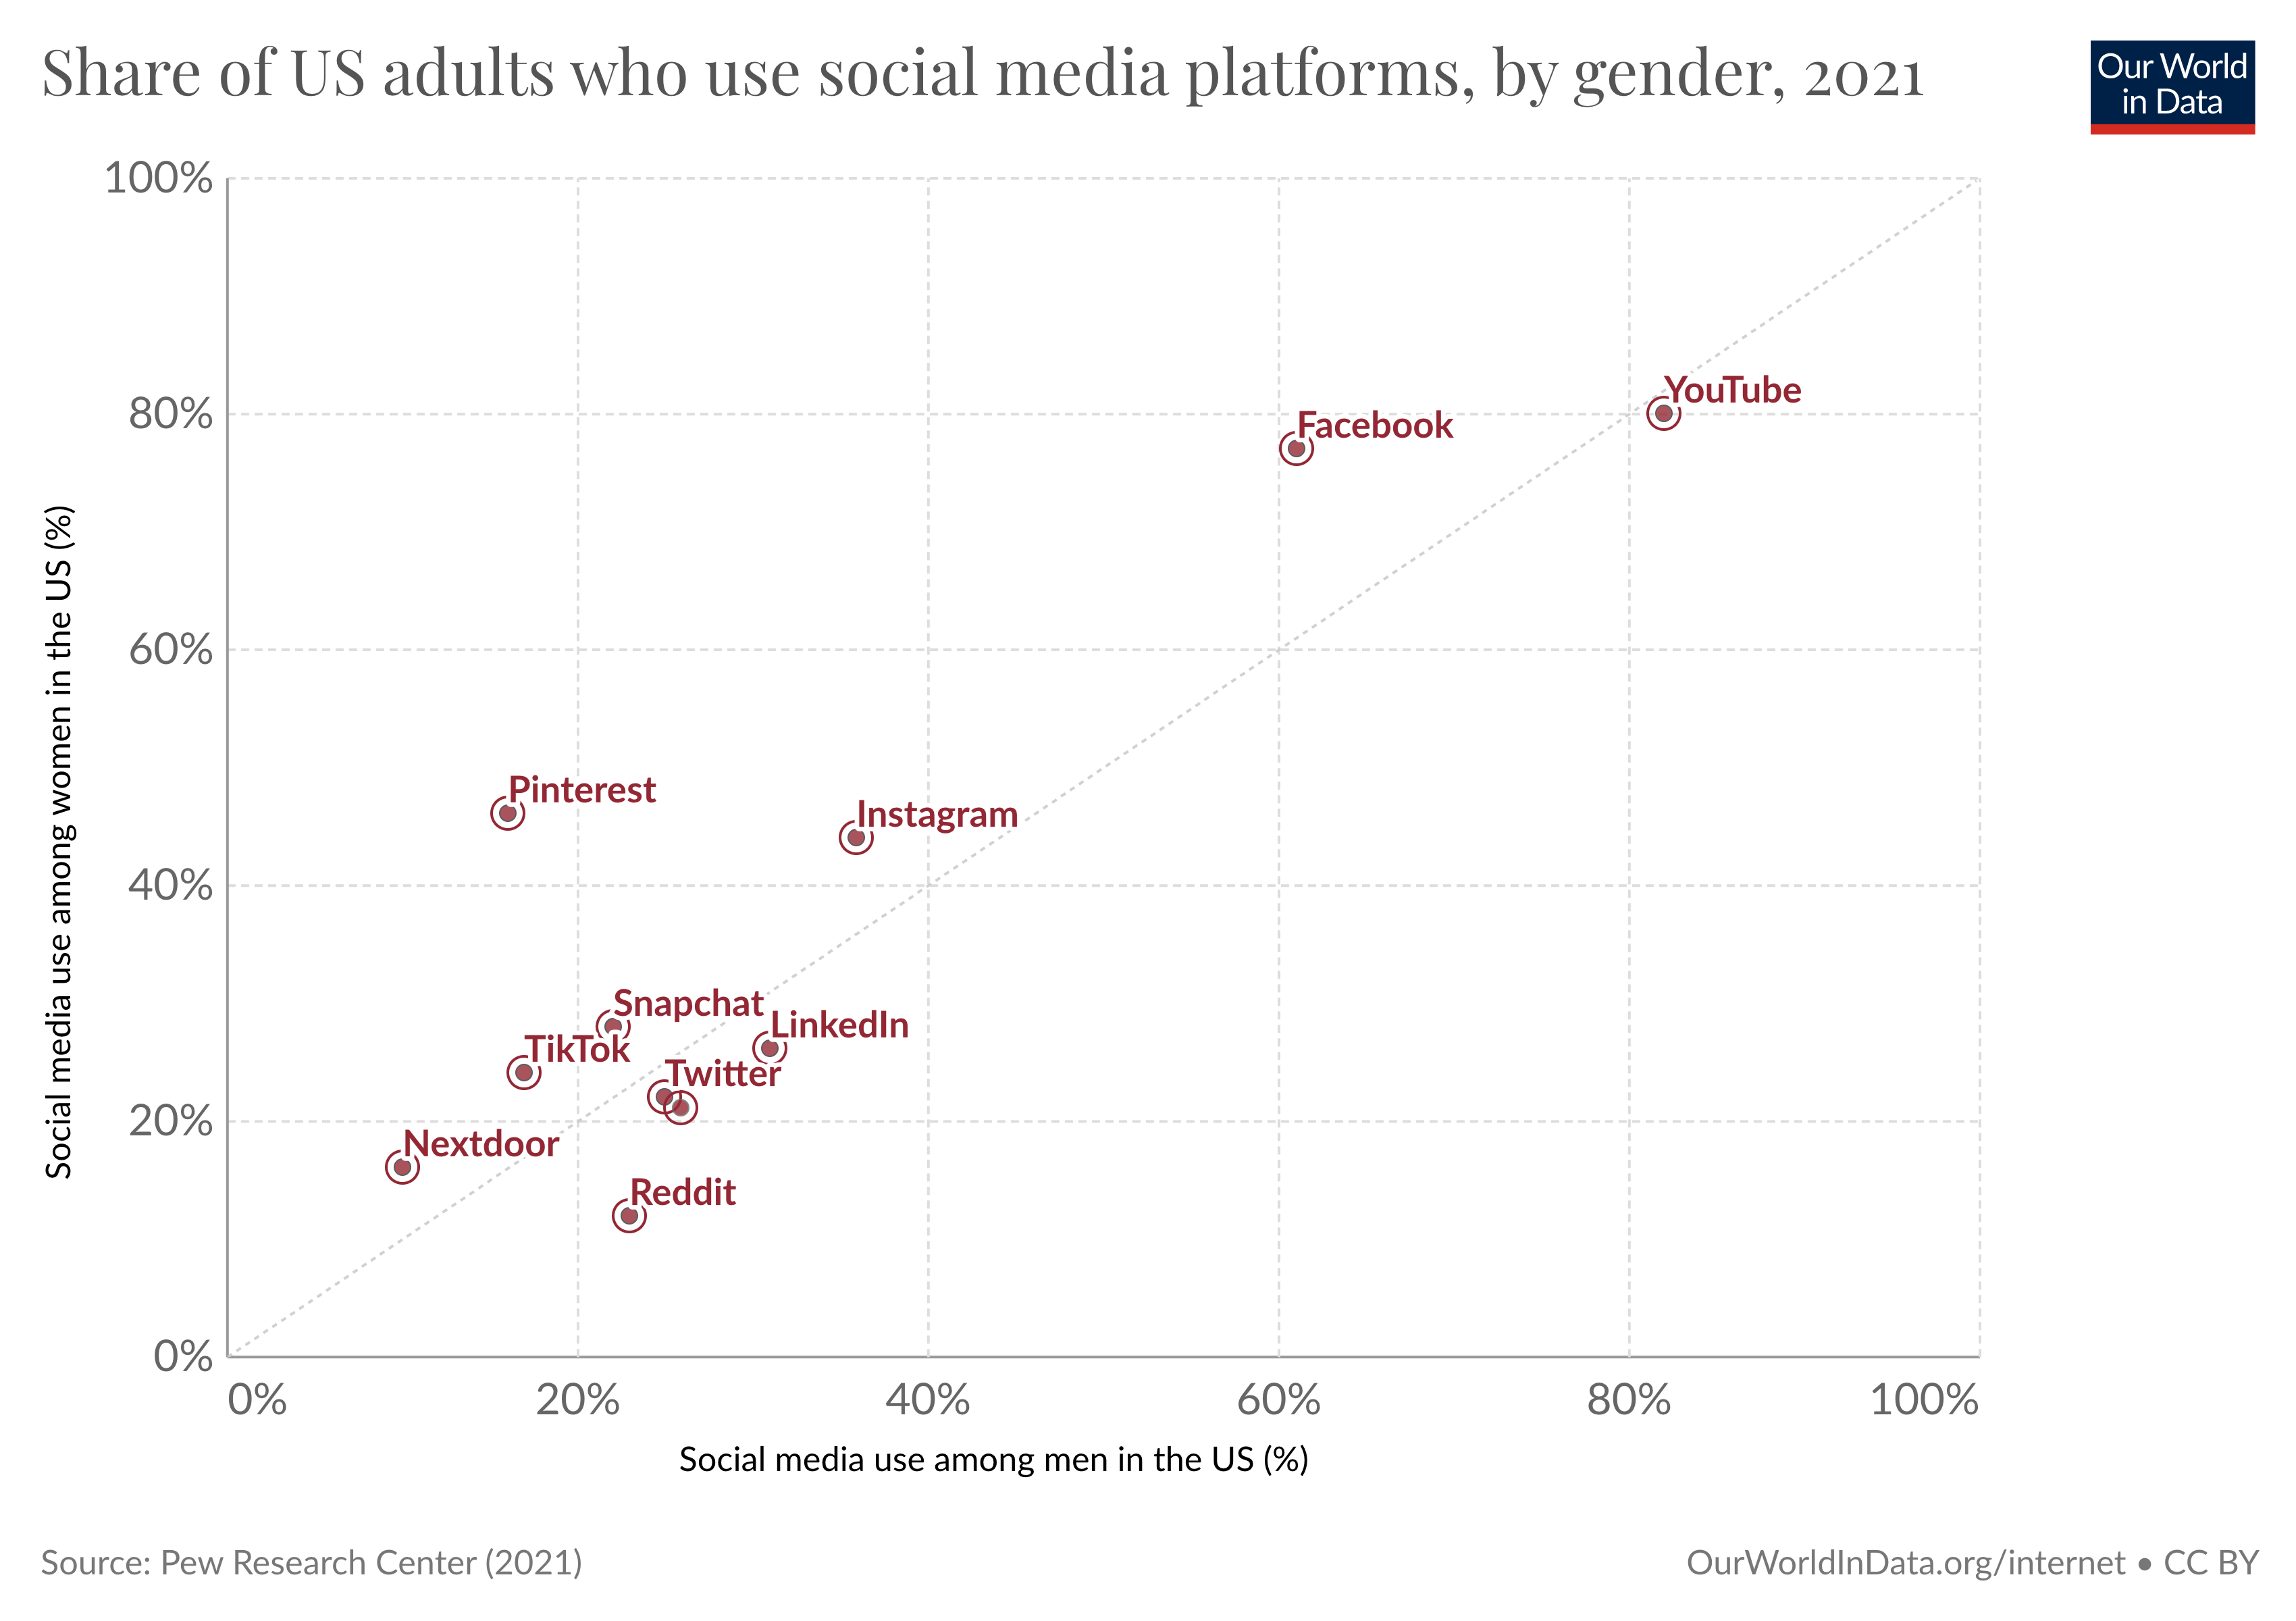 Scatterplot of the share of US adults using social media platforms, by gender showing that there are can be large differences depending on the platform.